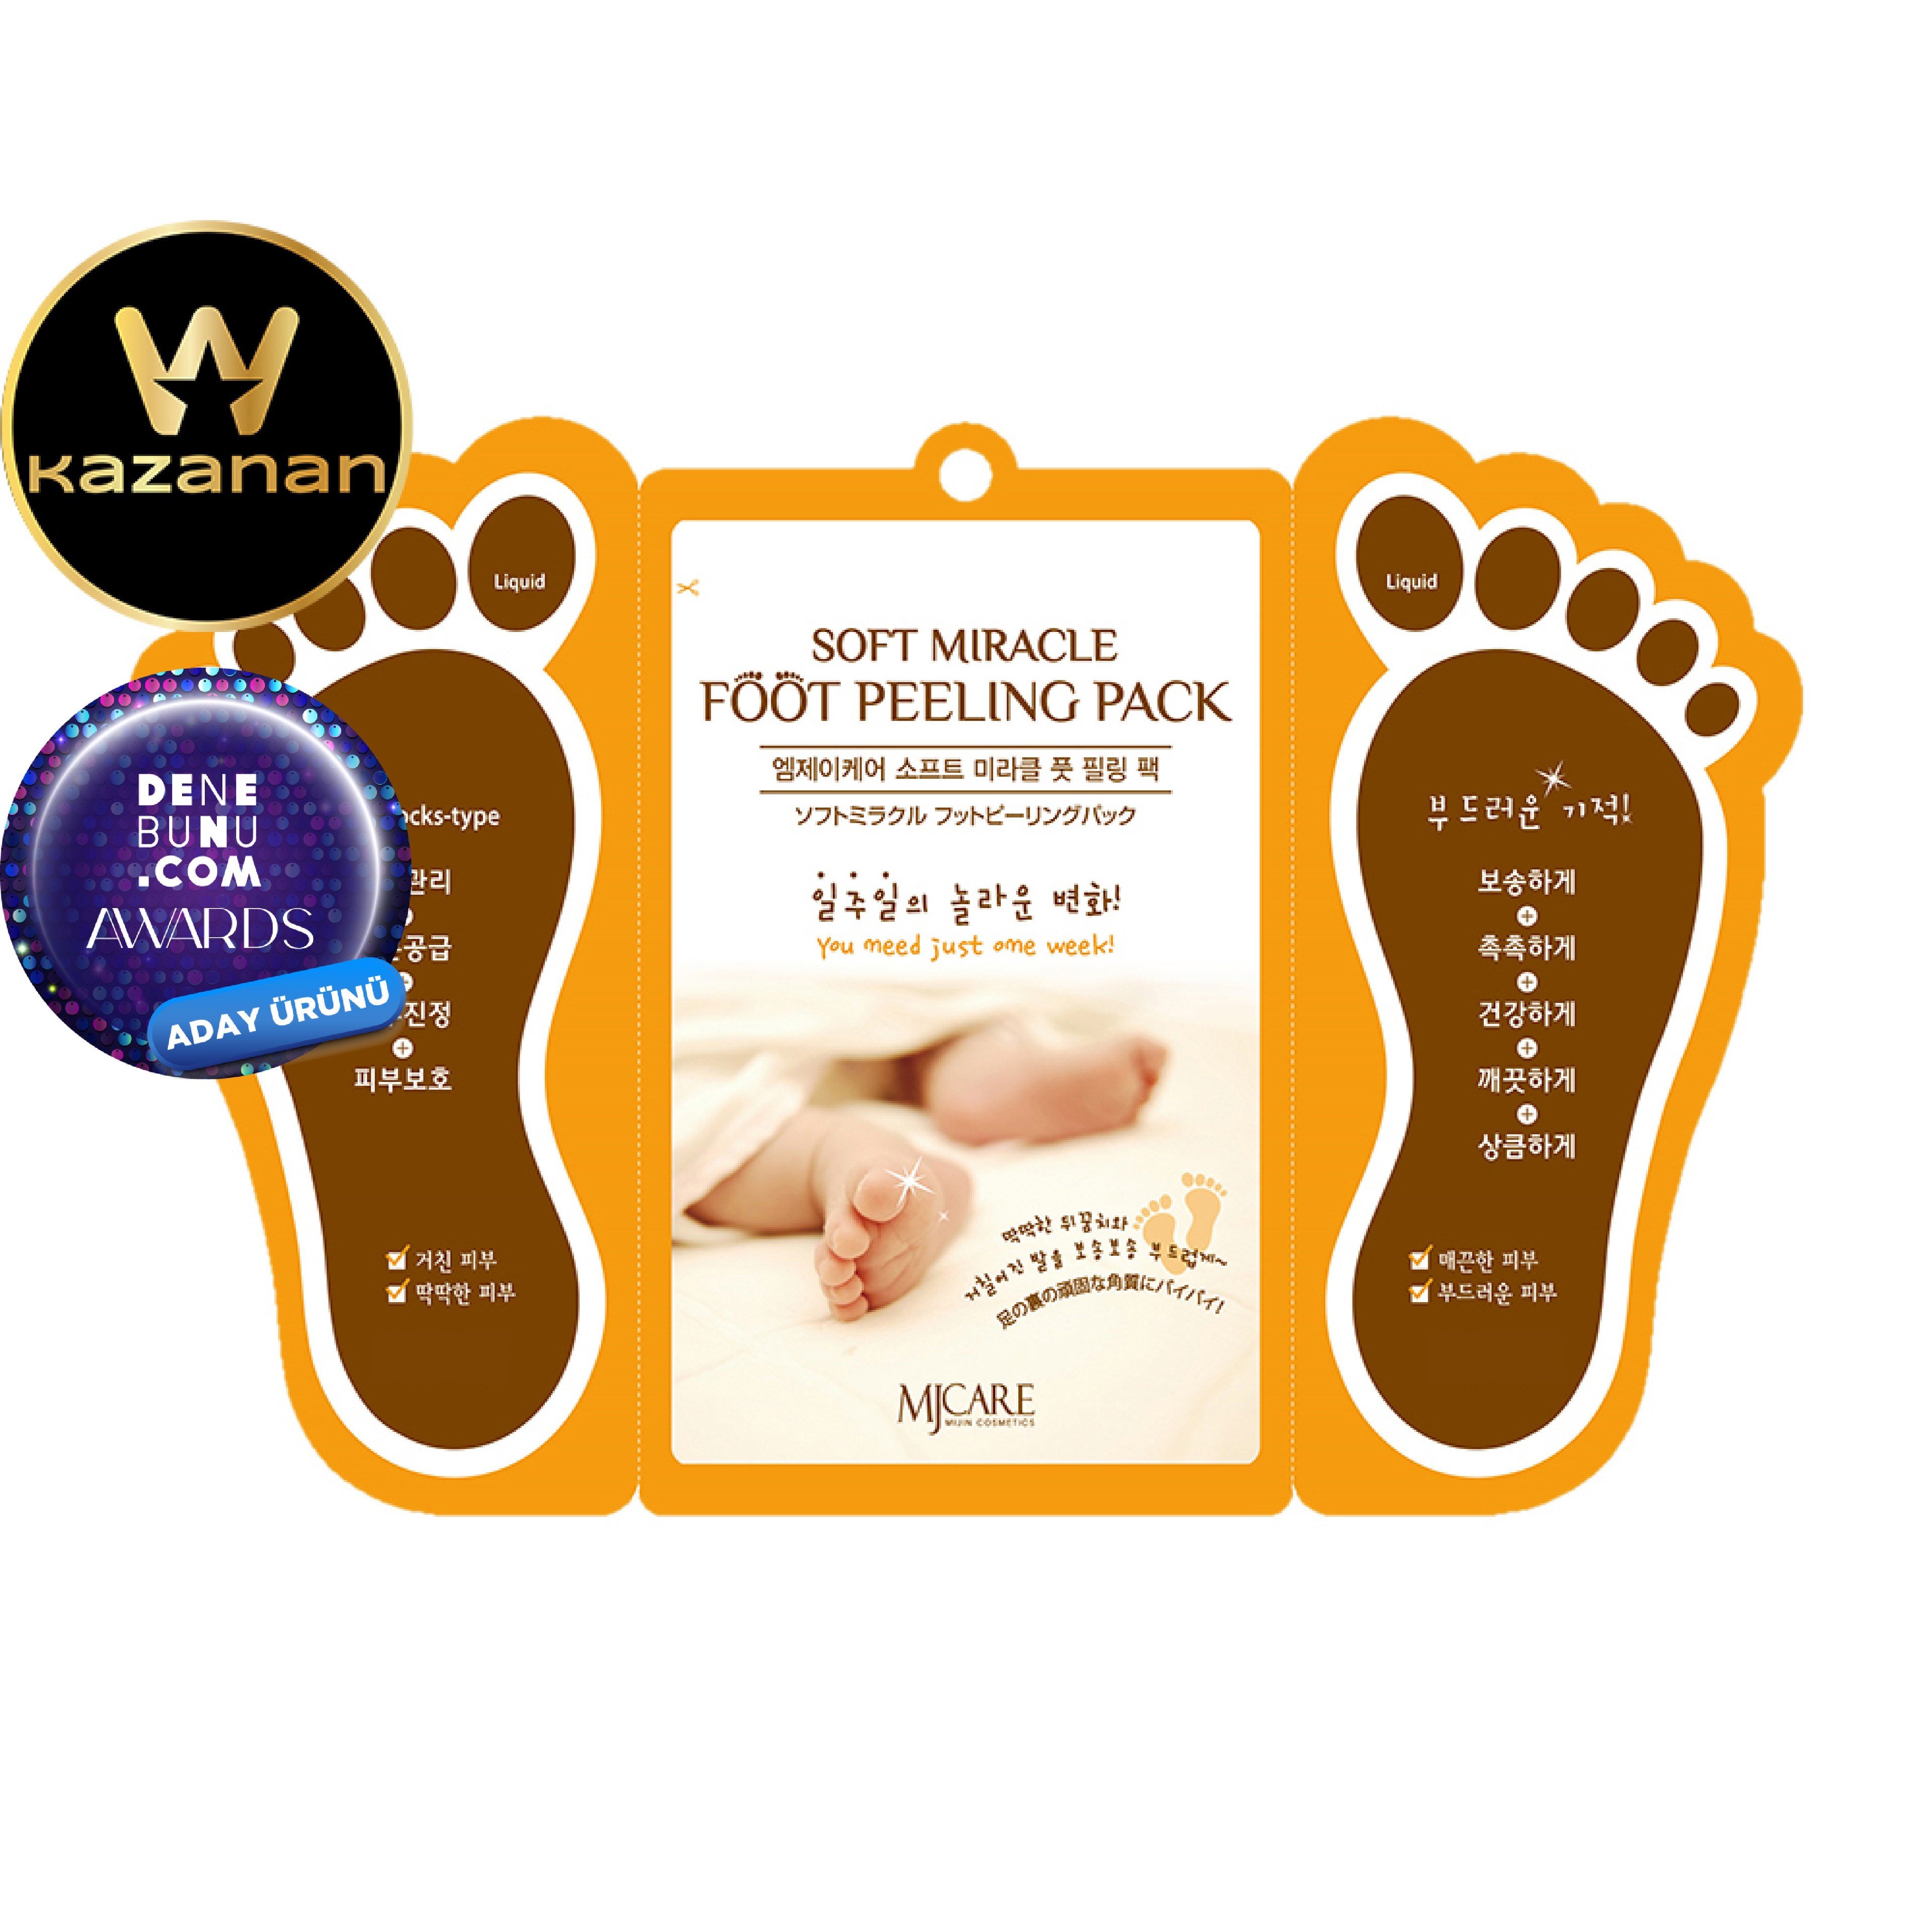 Mjcare Soft Miracle Foot Peeling Pack